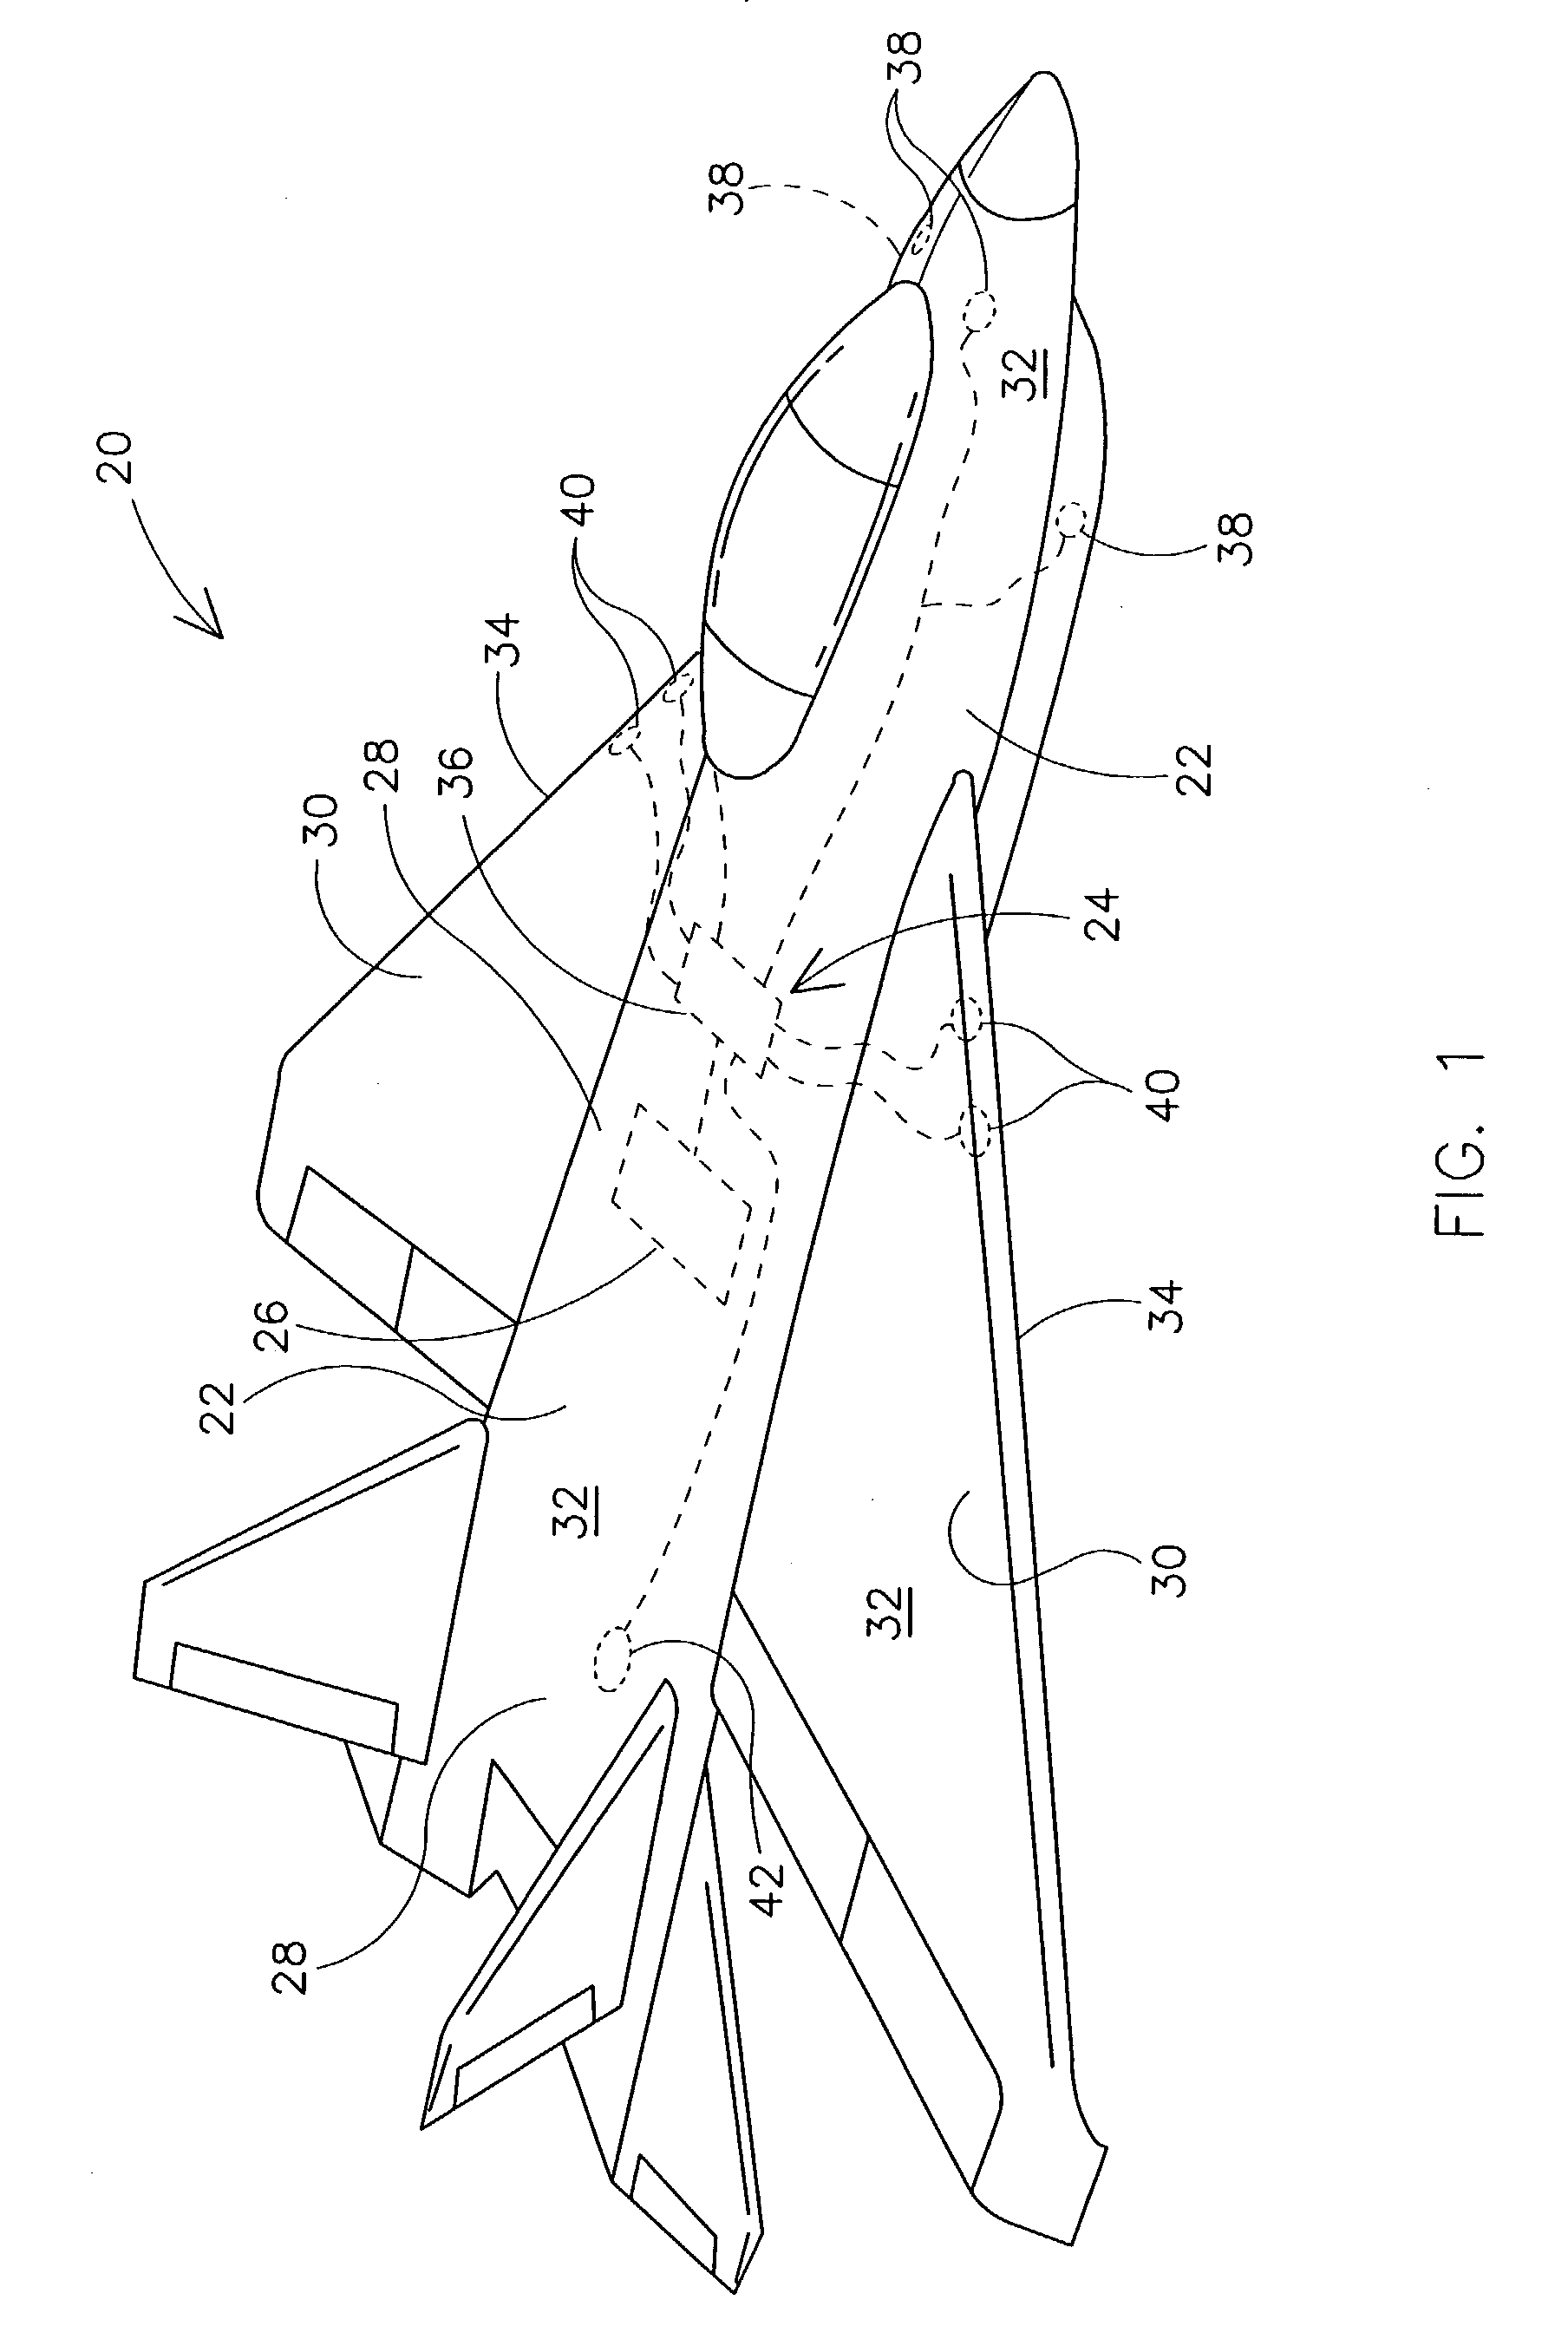 Method and apparatus for detecting conditions conducive to ice formation